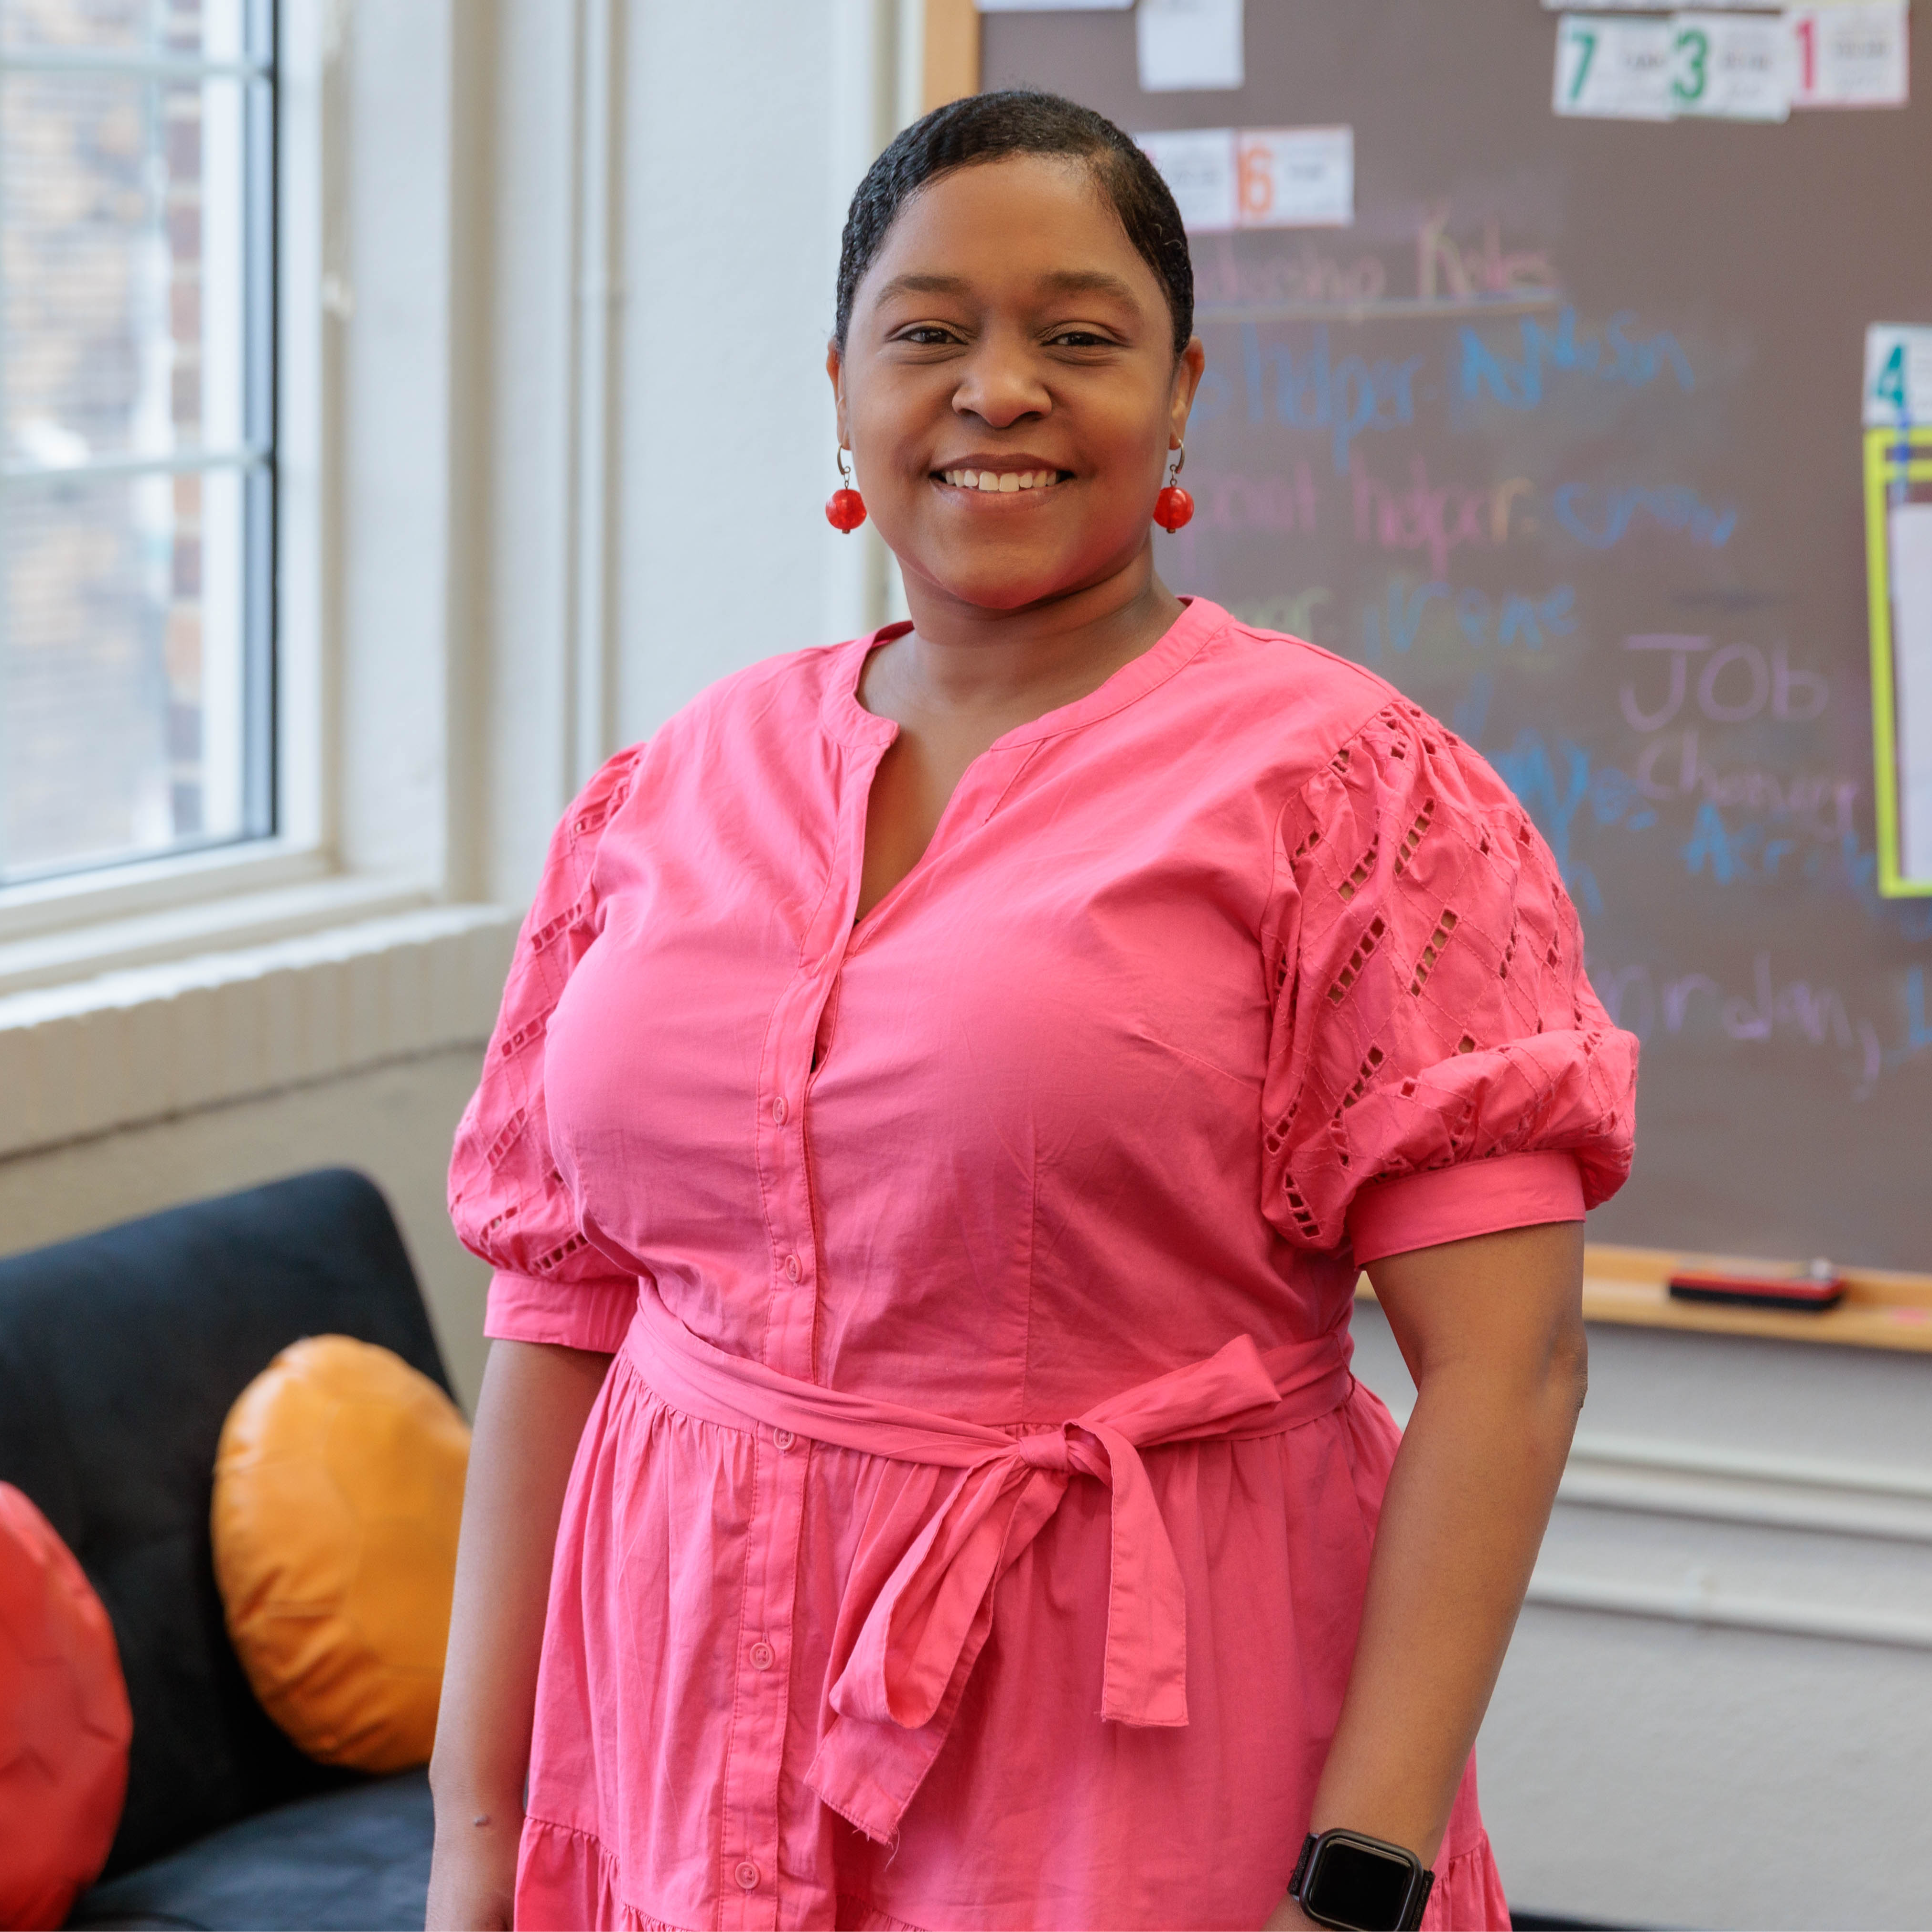 African American woman wearing a pink dress standing in a classroom